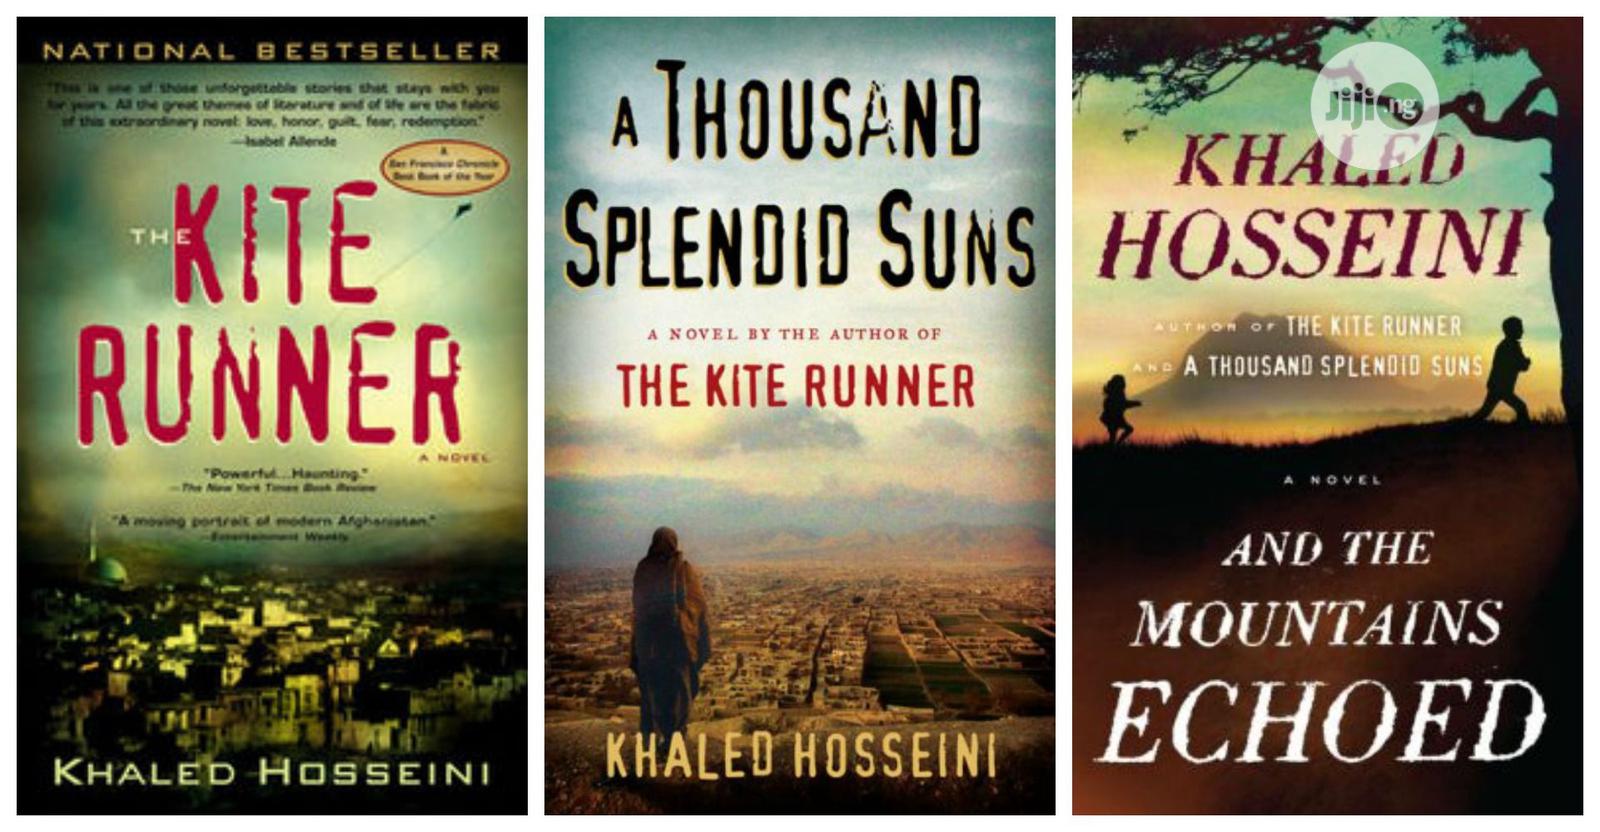 The Kite Runner (2003), A Thousand Splendid Suns (2007), and And The Mounta...